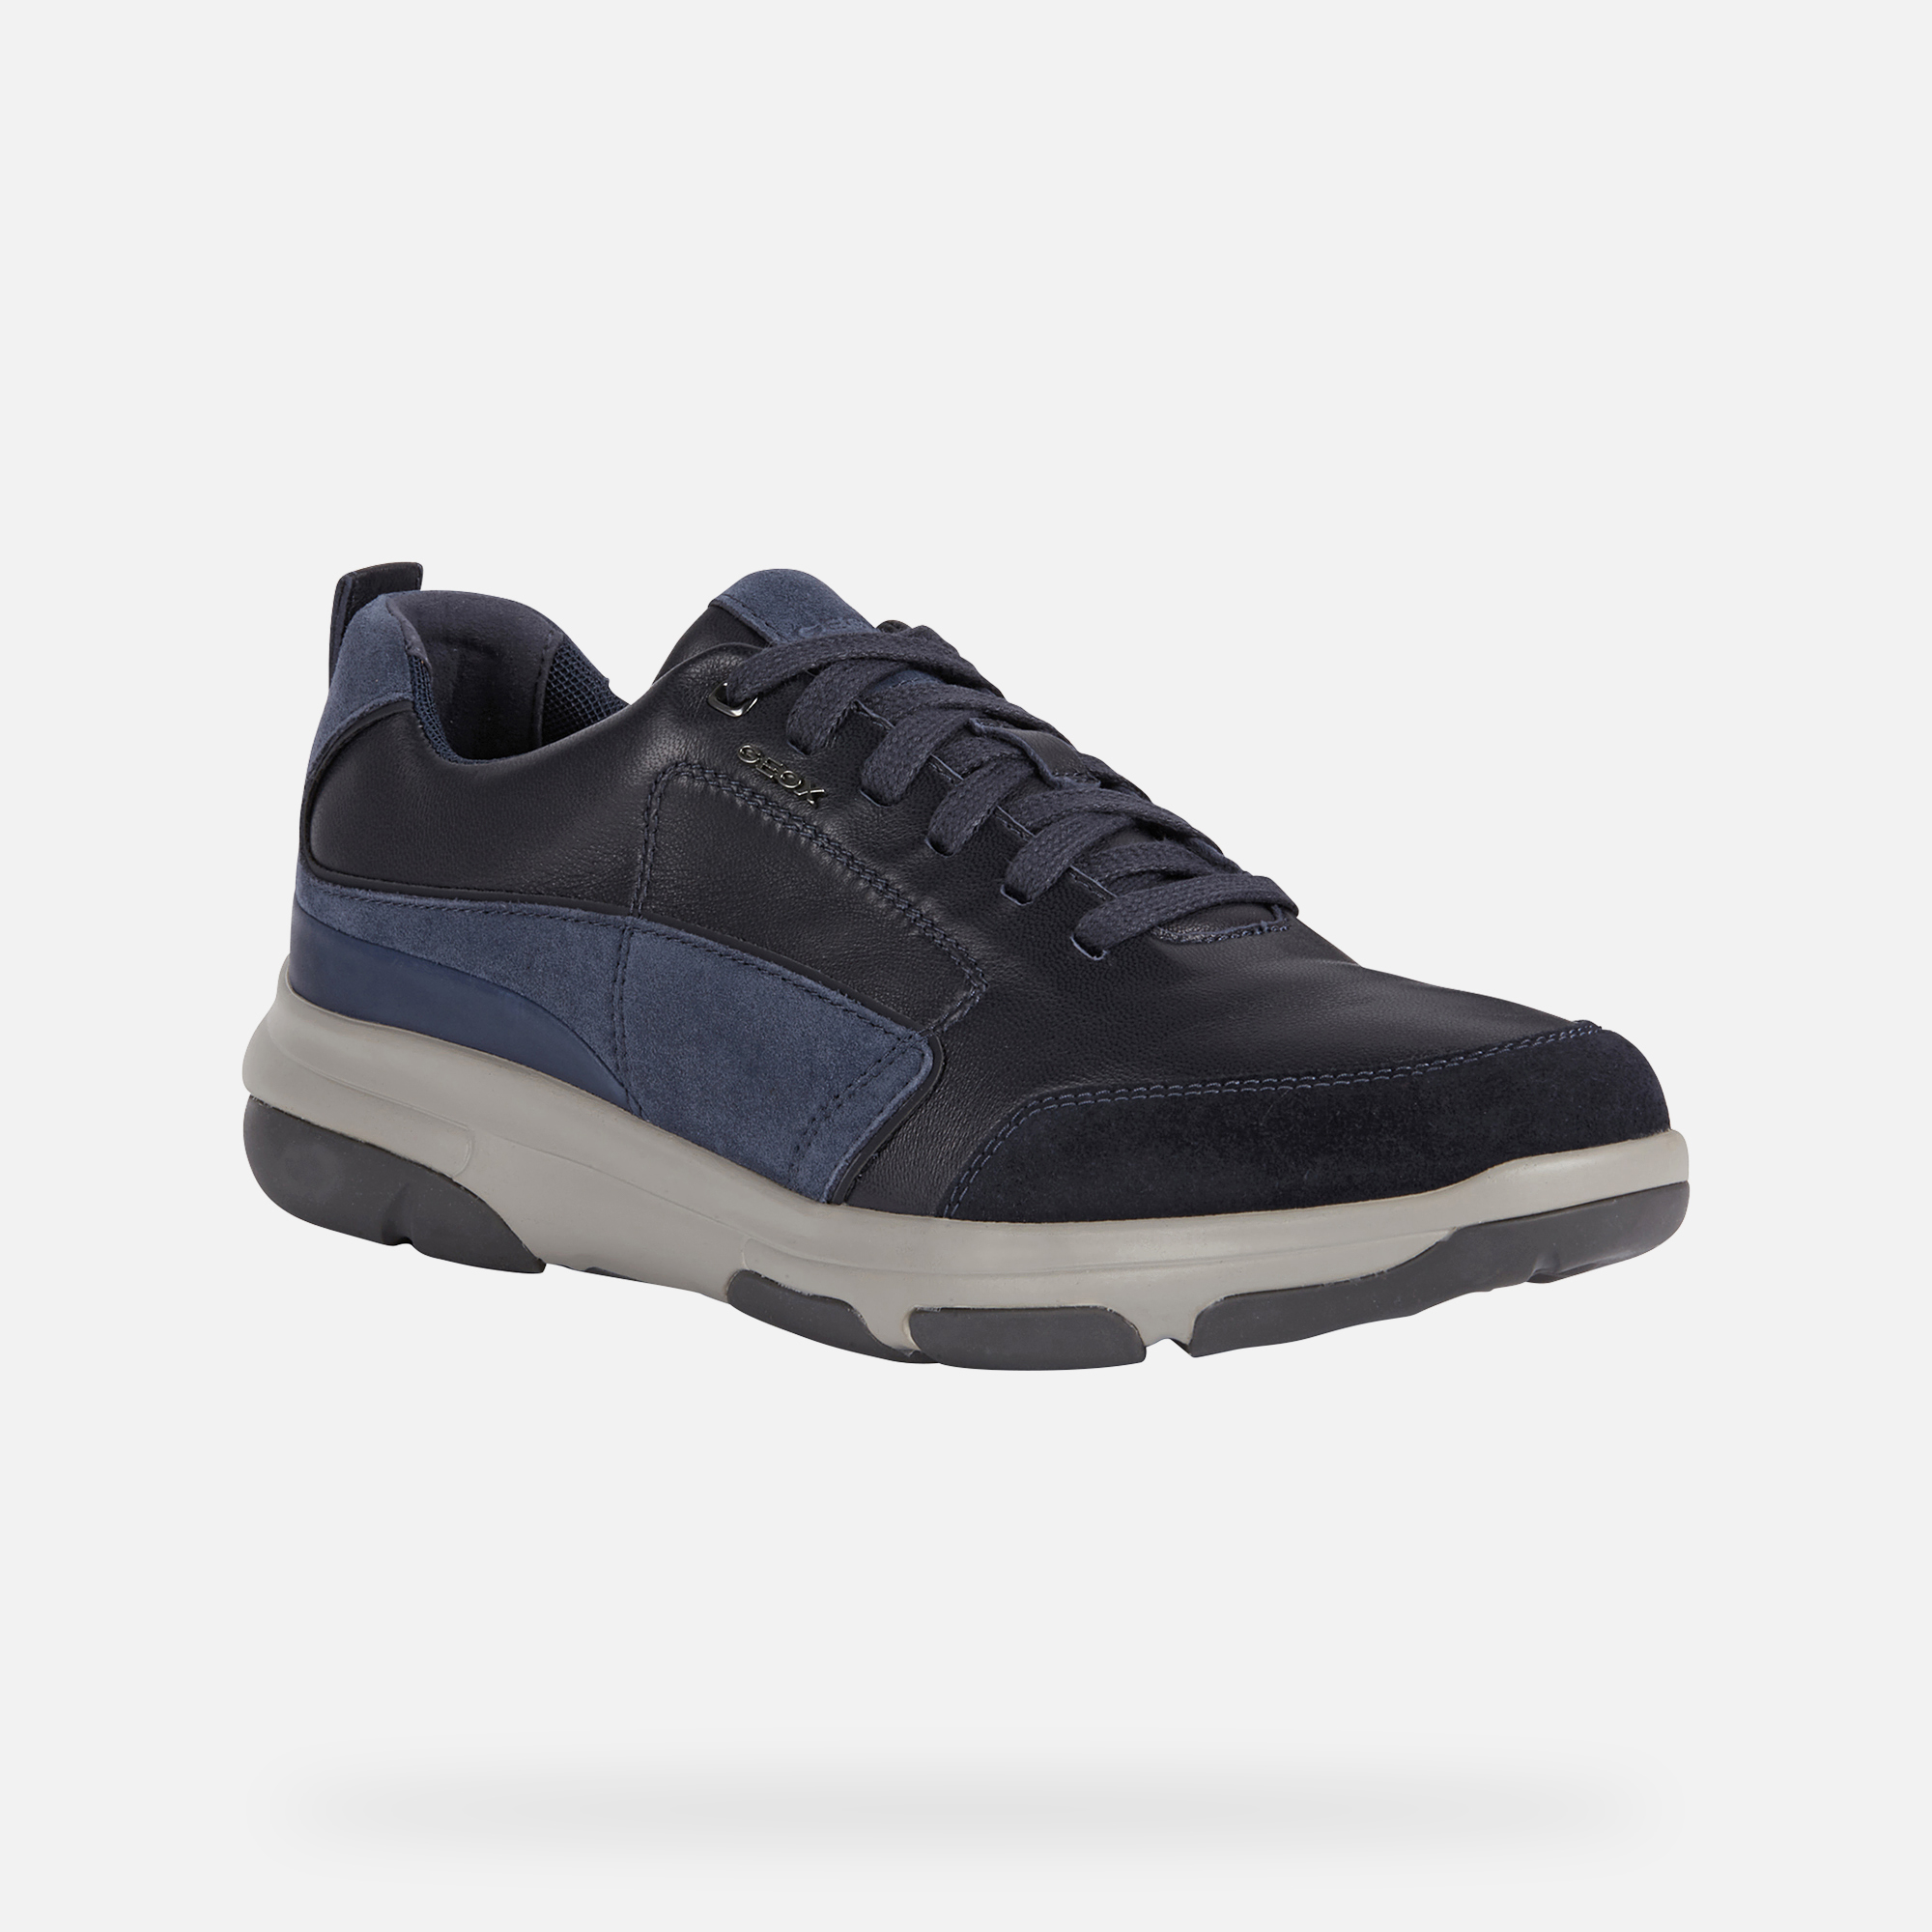 Geox® XAND 2 Man: Navy blue Sneakers | Geox® Ventilated Cushioning